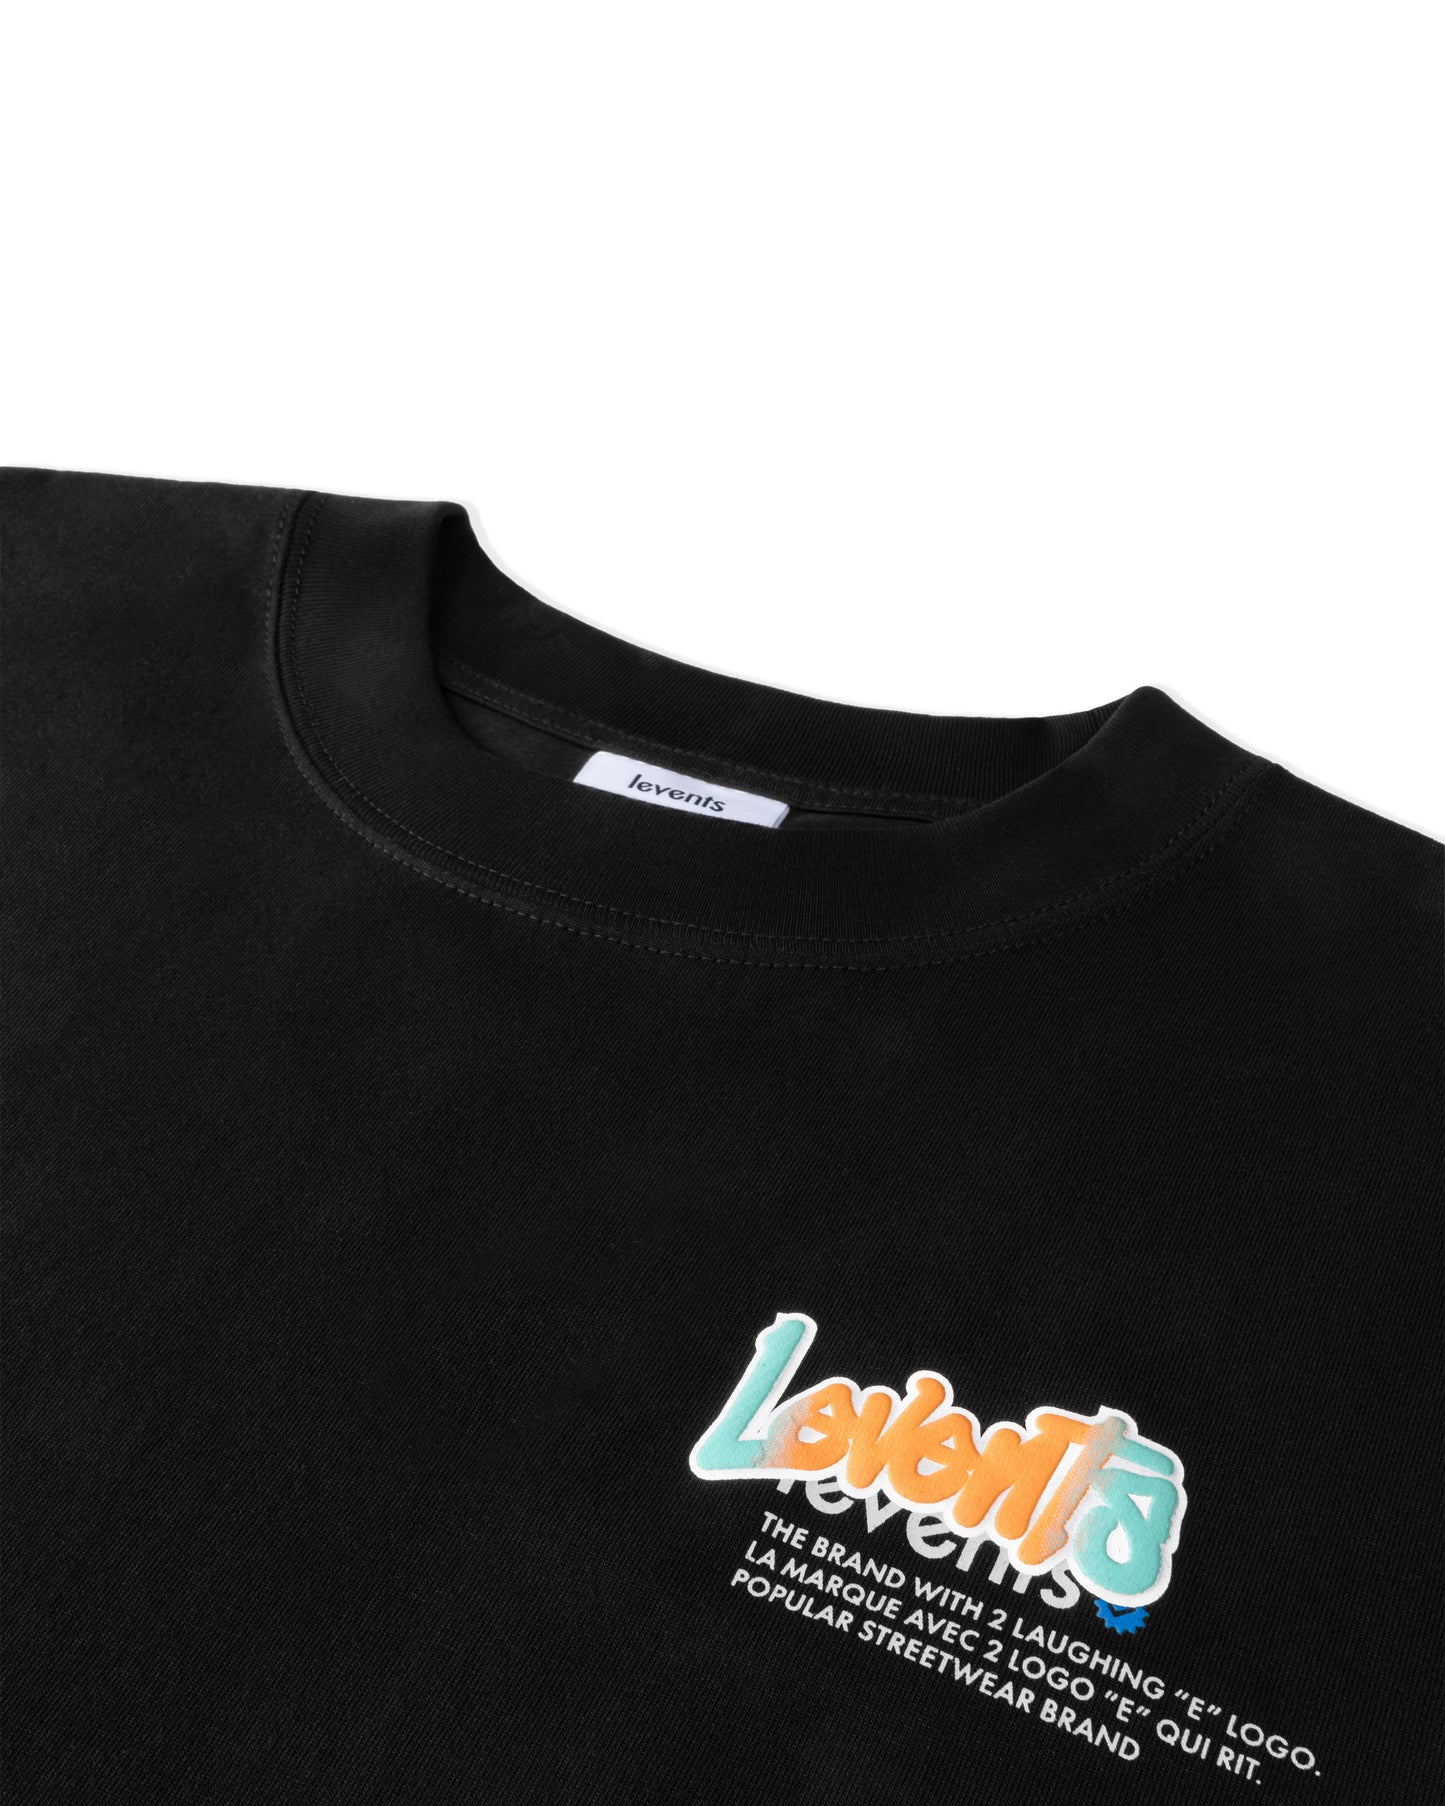 Levents® Special Popular Tee/ Black